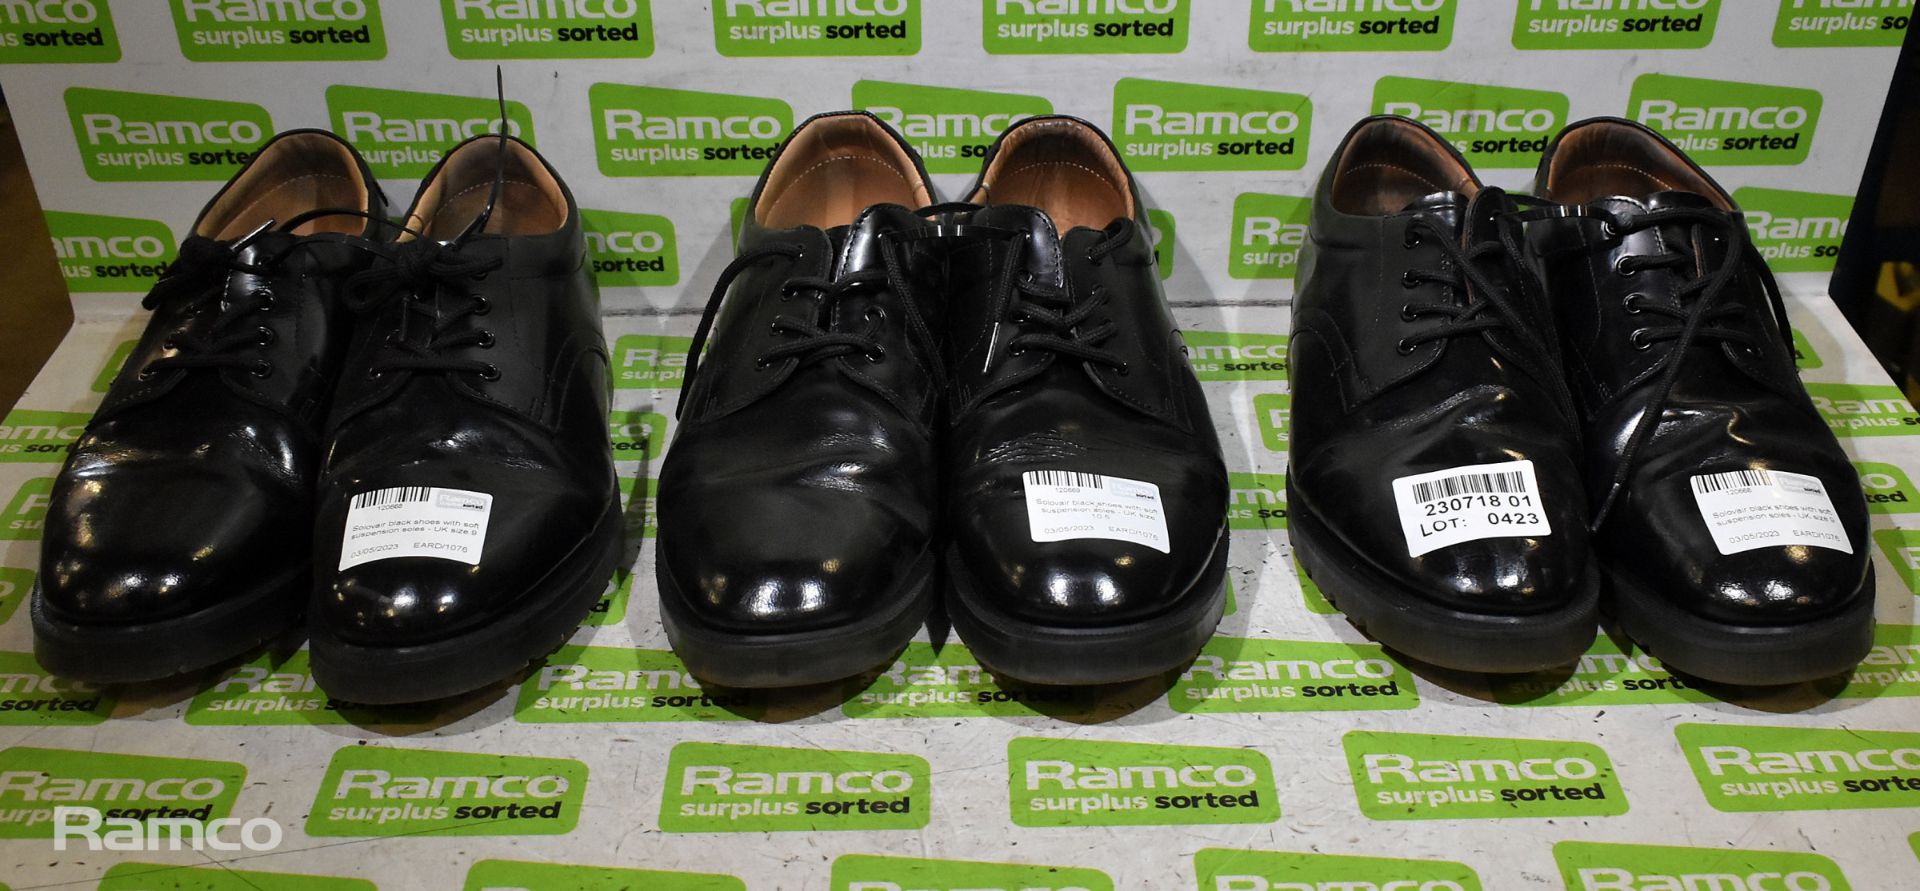 3x pairs of Solovair black shoes with soft suspension soles - 2x UK size 9, 1x UK size 10.5